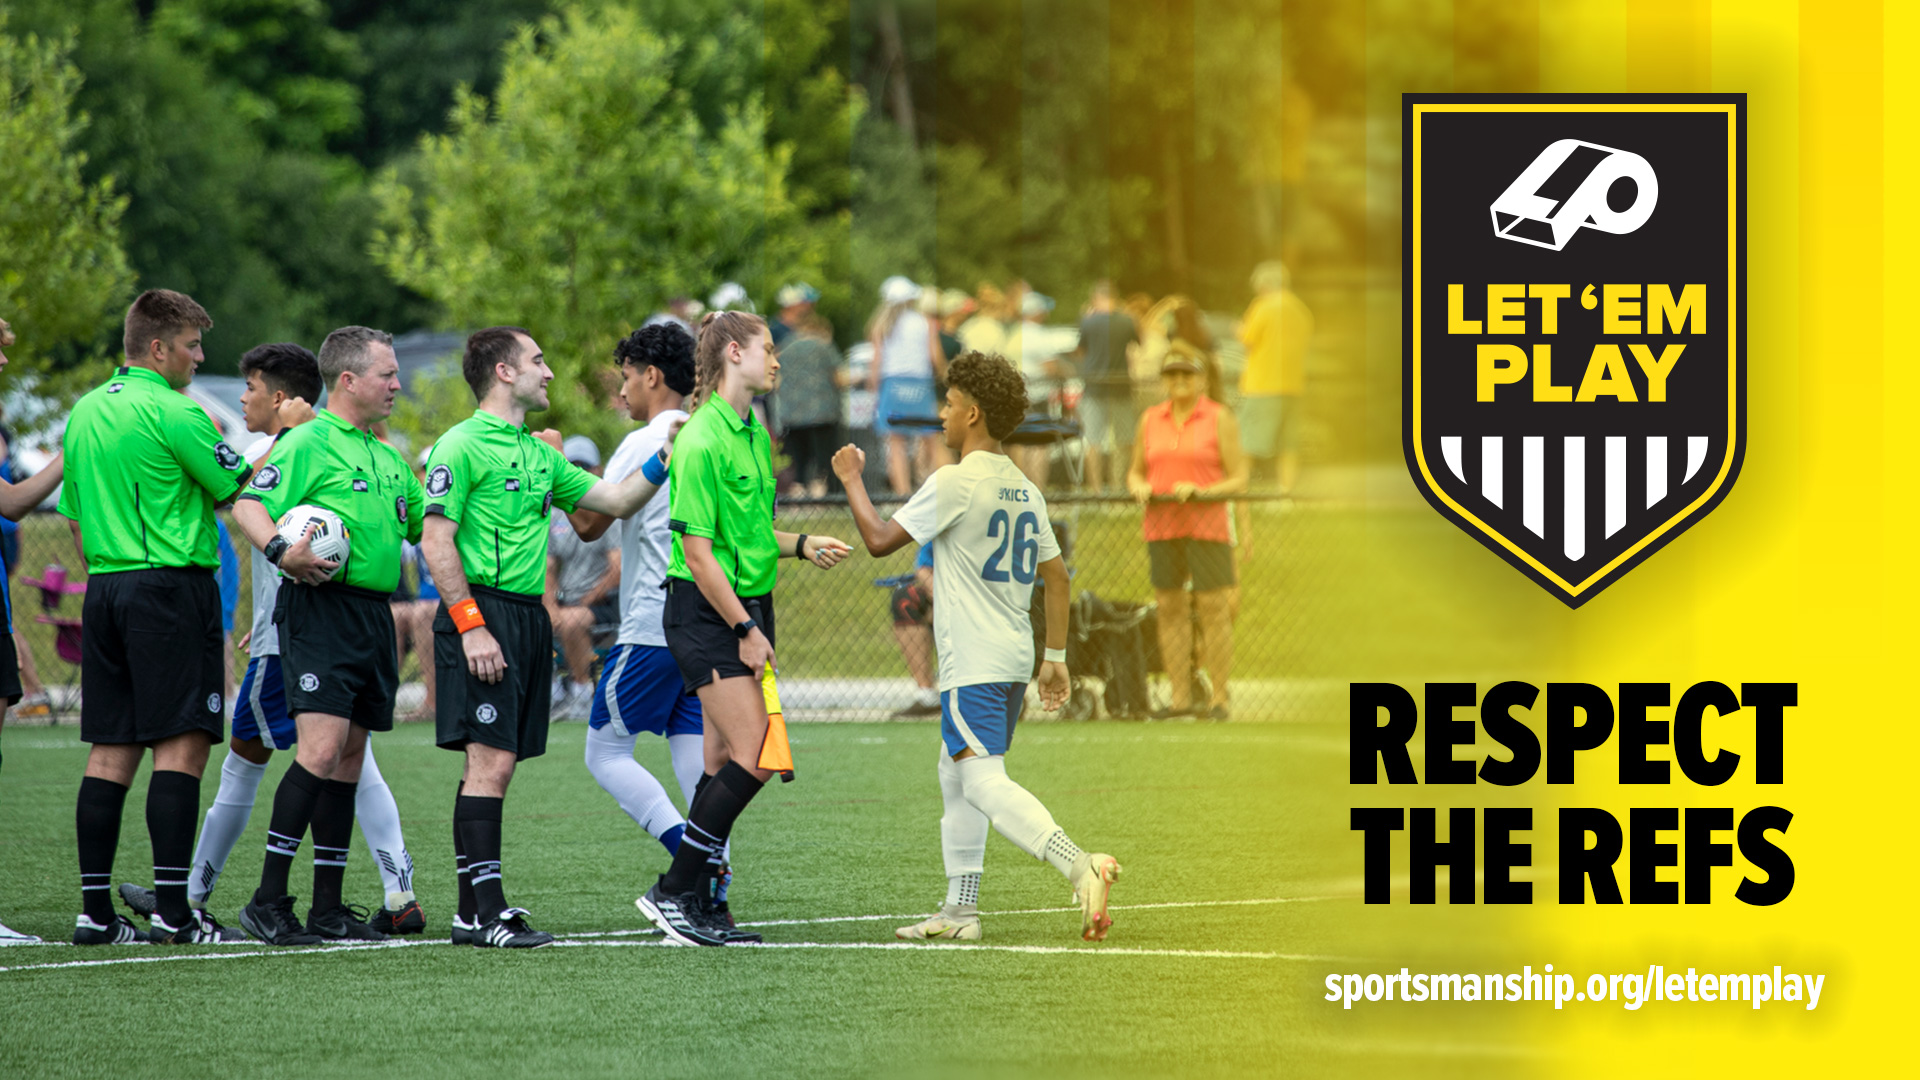 St. Louis Sports Commission Launches Let ’em Play Initiative Aimed At Promoting Respect Toward Referees